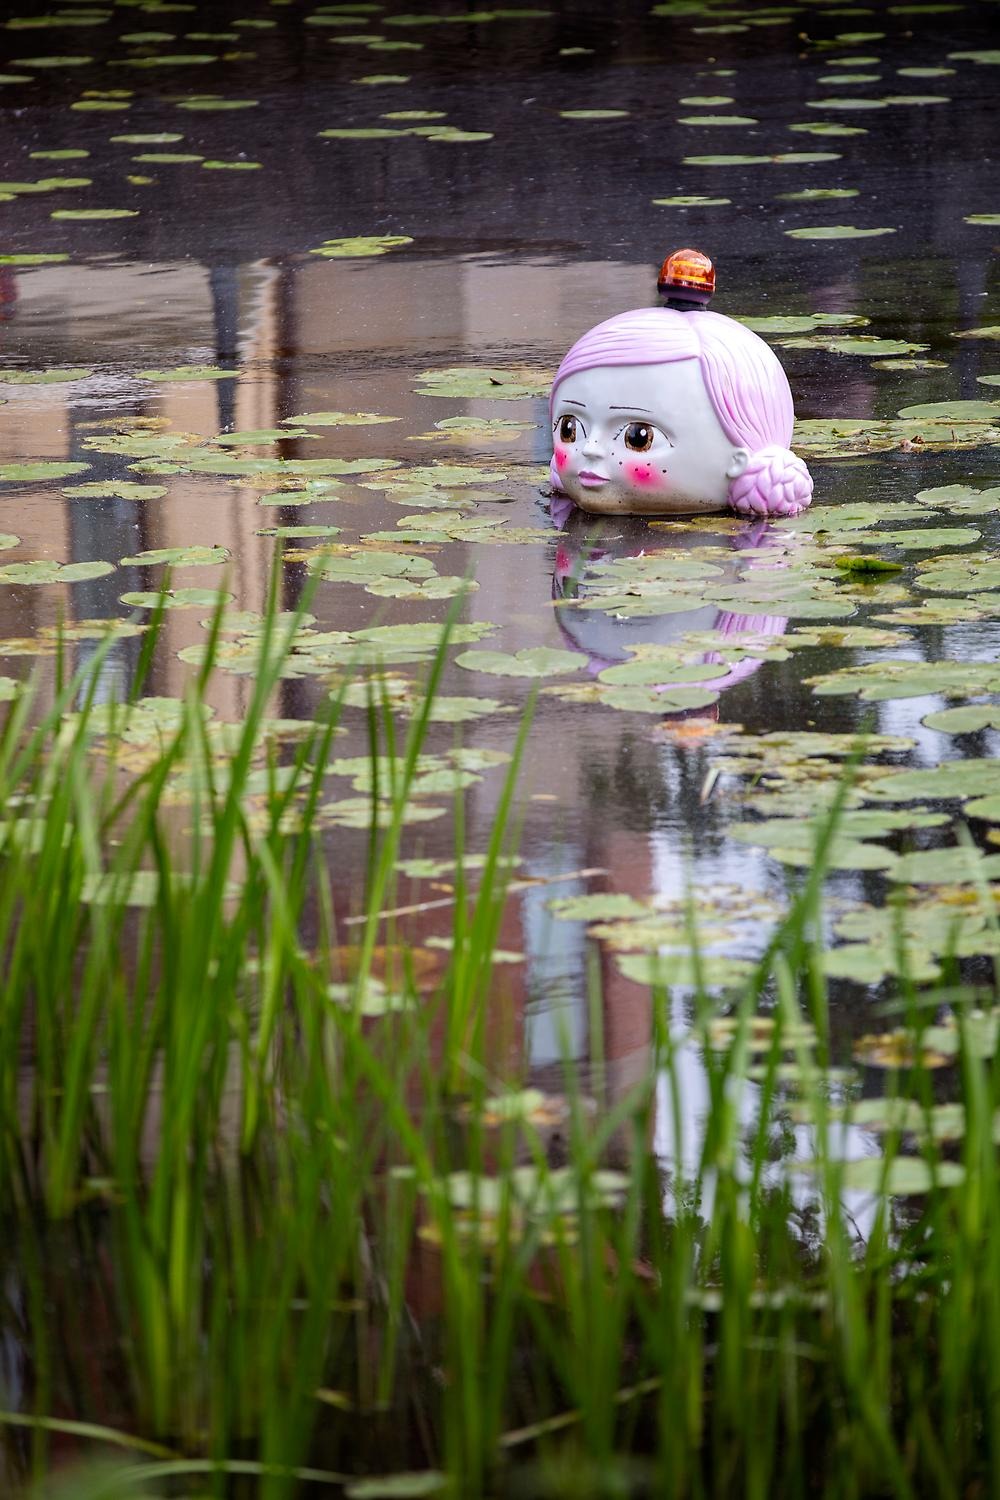 In the water among the water lilies floats a large girl's face with an orange warning light on its head. She has light skin, brown eyes, pink cheeks, freckles and pink braids similar to Star Wars Leia Solo's braids.